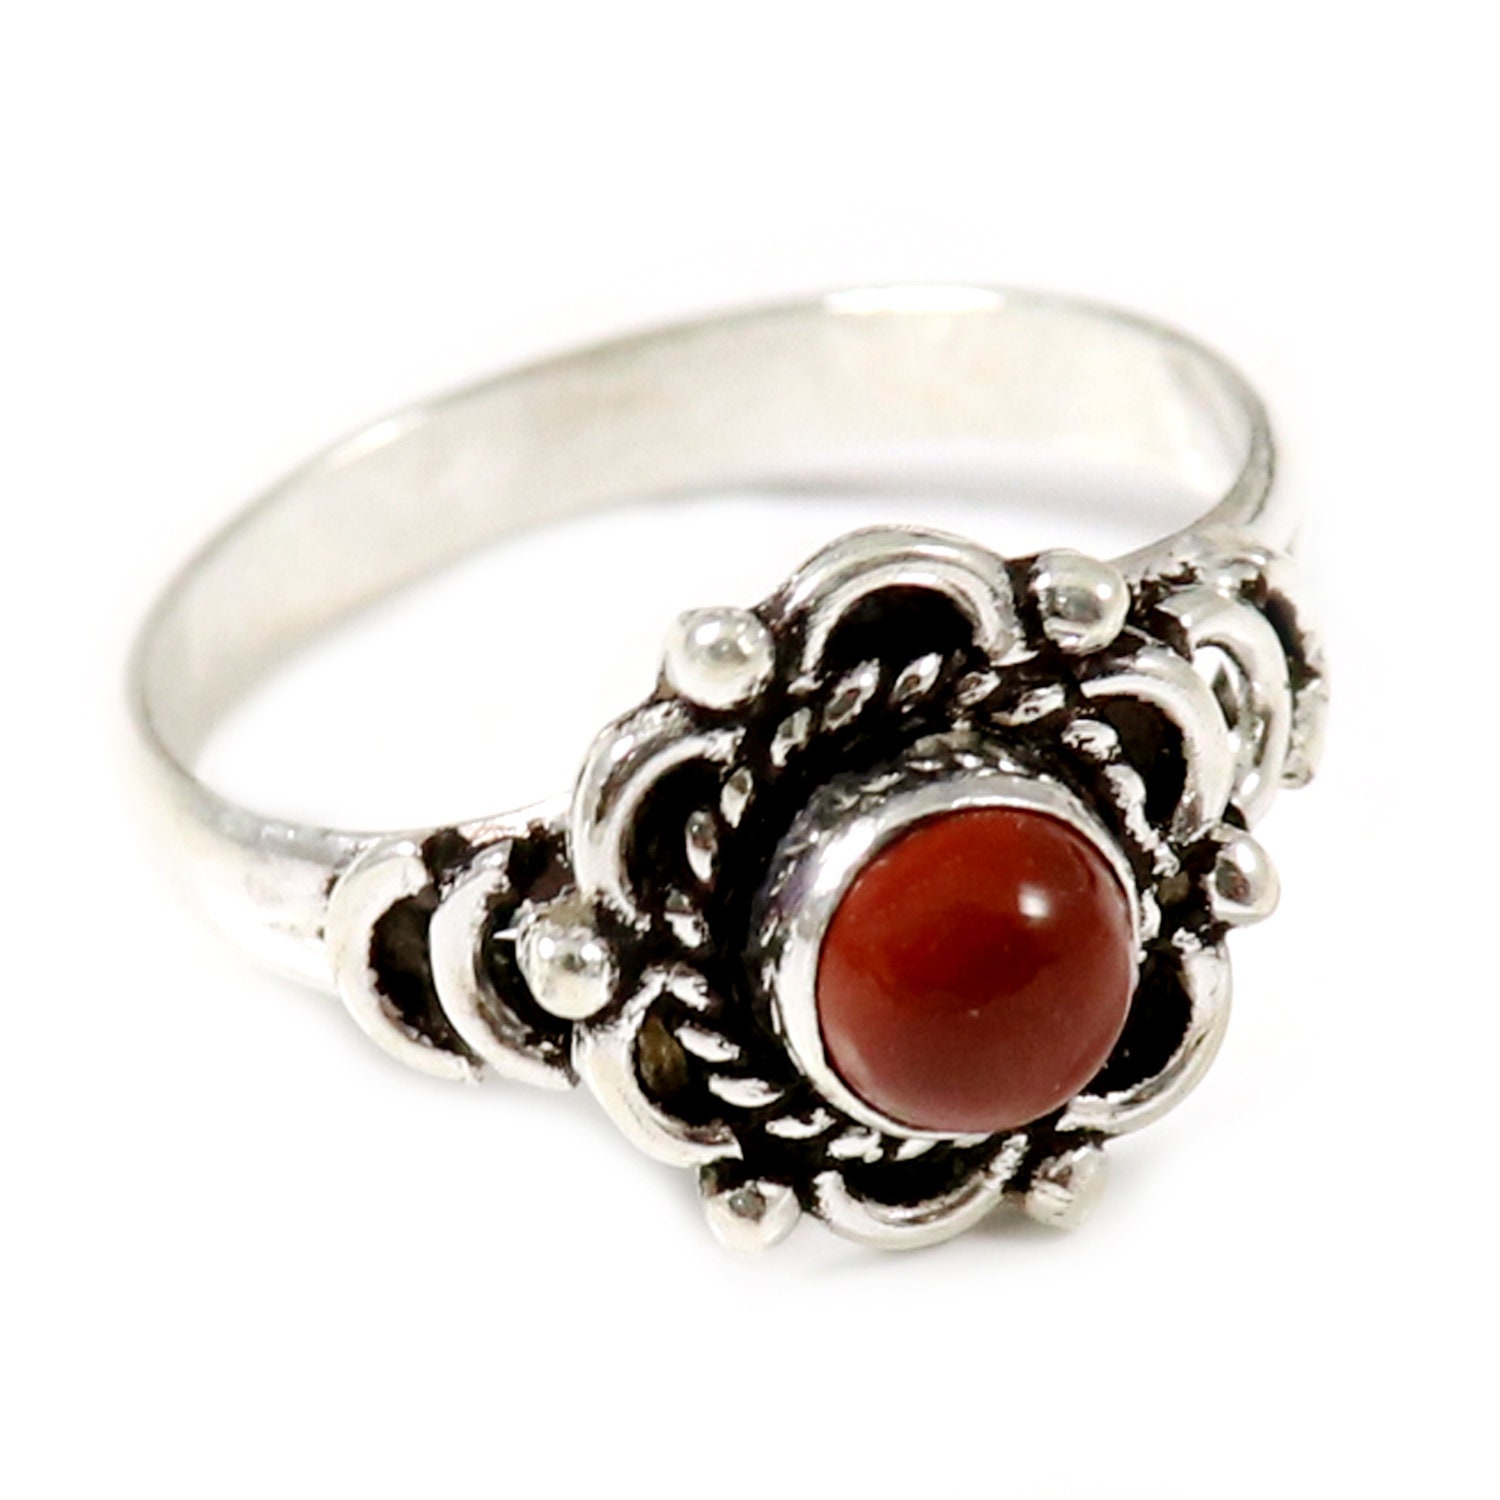 Red Jasper Natural Gemstone Solid 925 Sterling Silver Ring Solitaire Ring Handmade Vintage Jewelry Birthstone All Size Ring GESR-175H